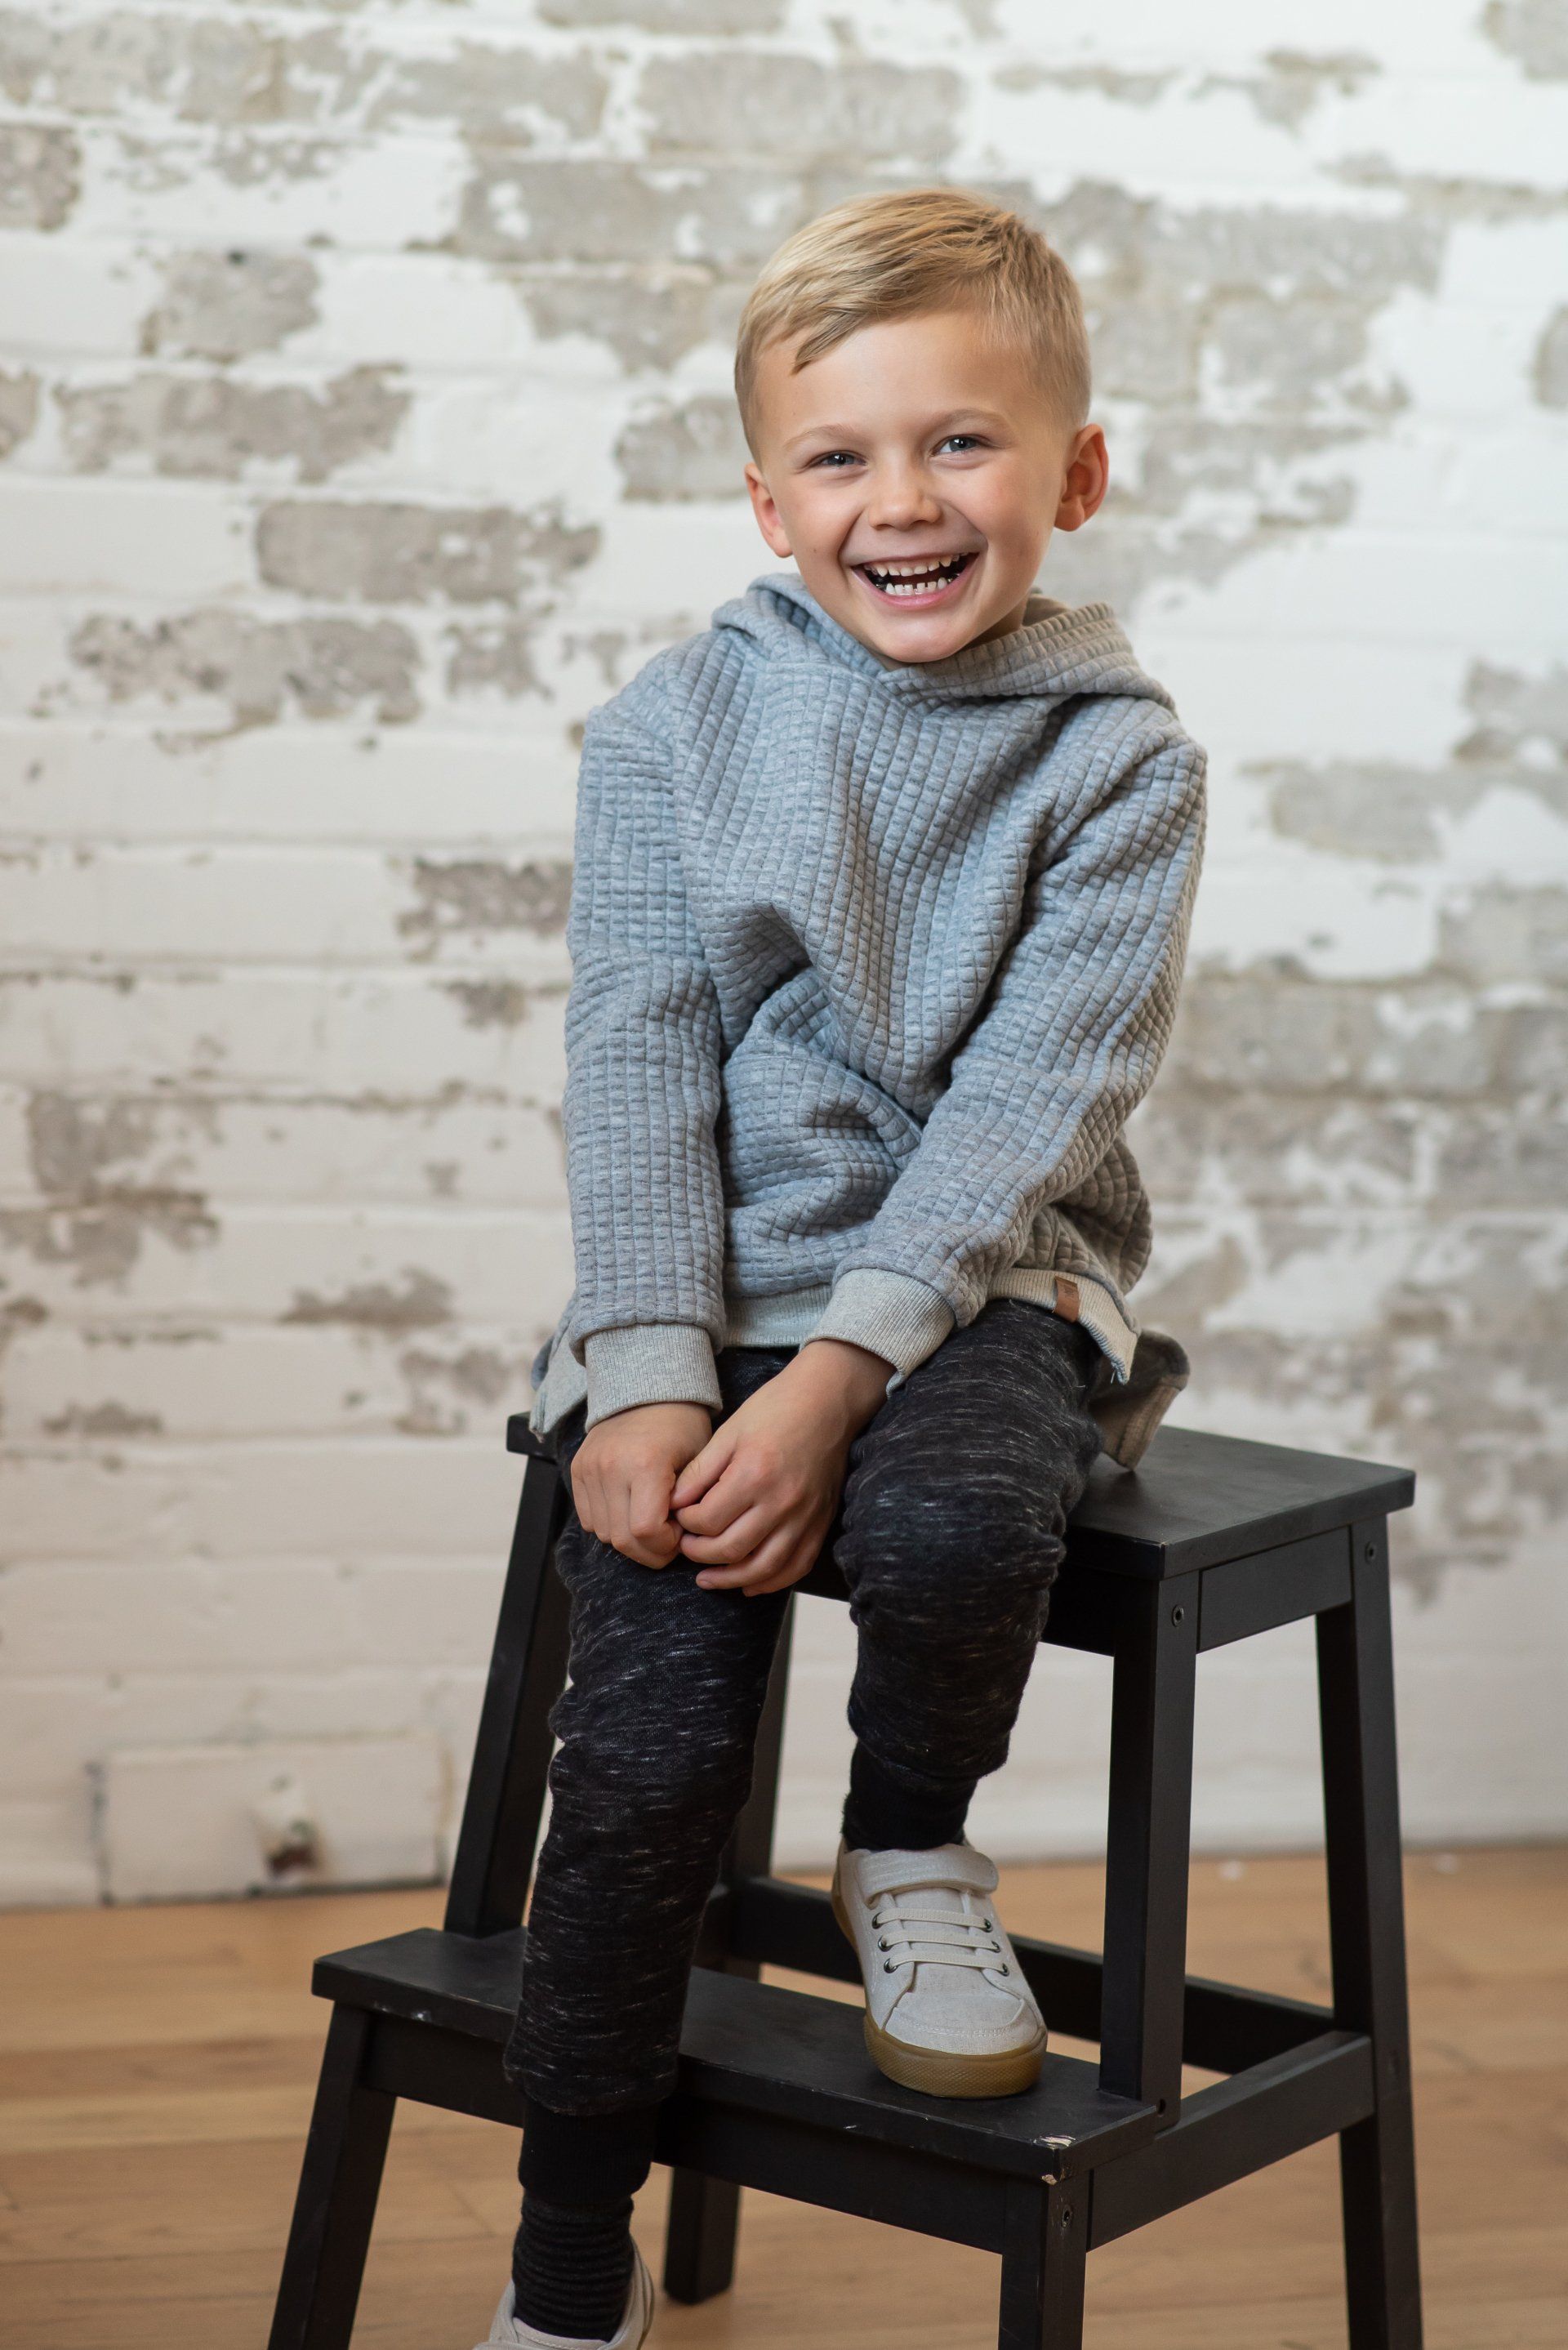 Boy on stool in studio | Child photography | Stacey Naglie Toronto